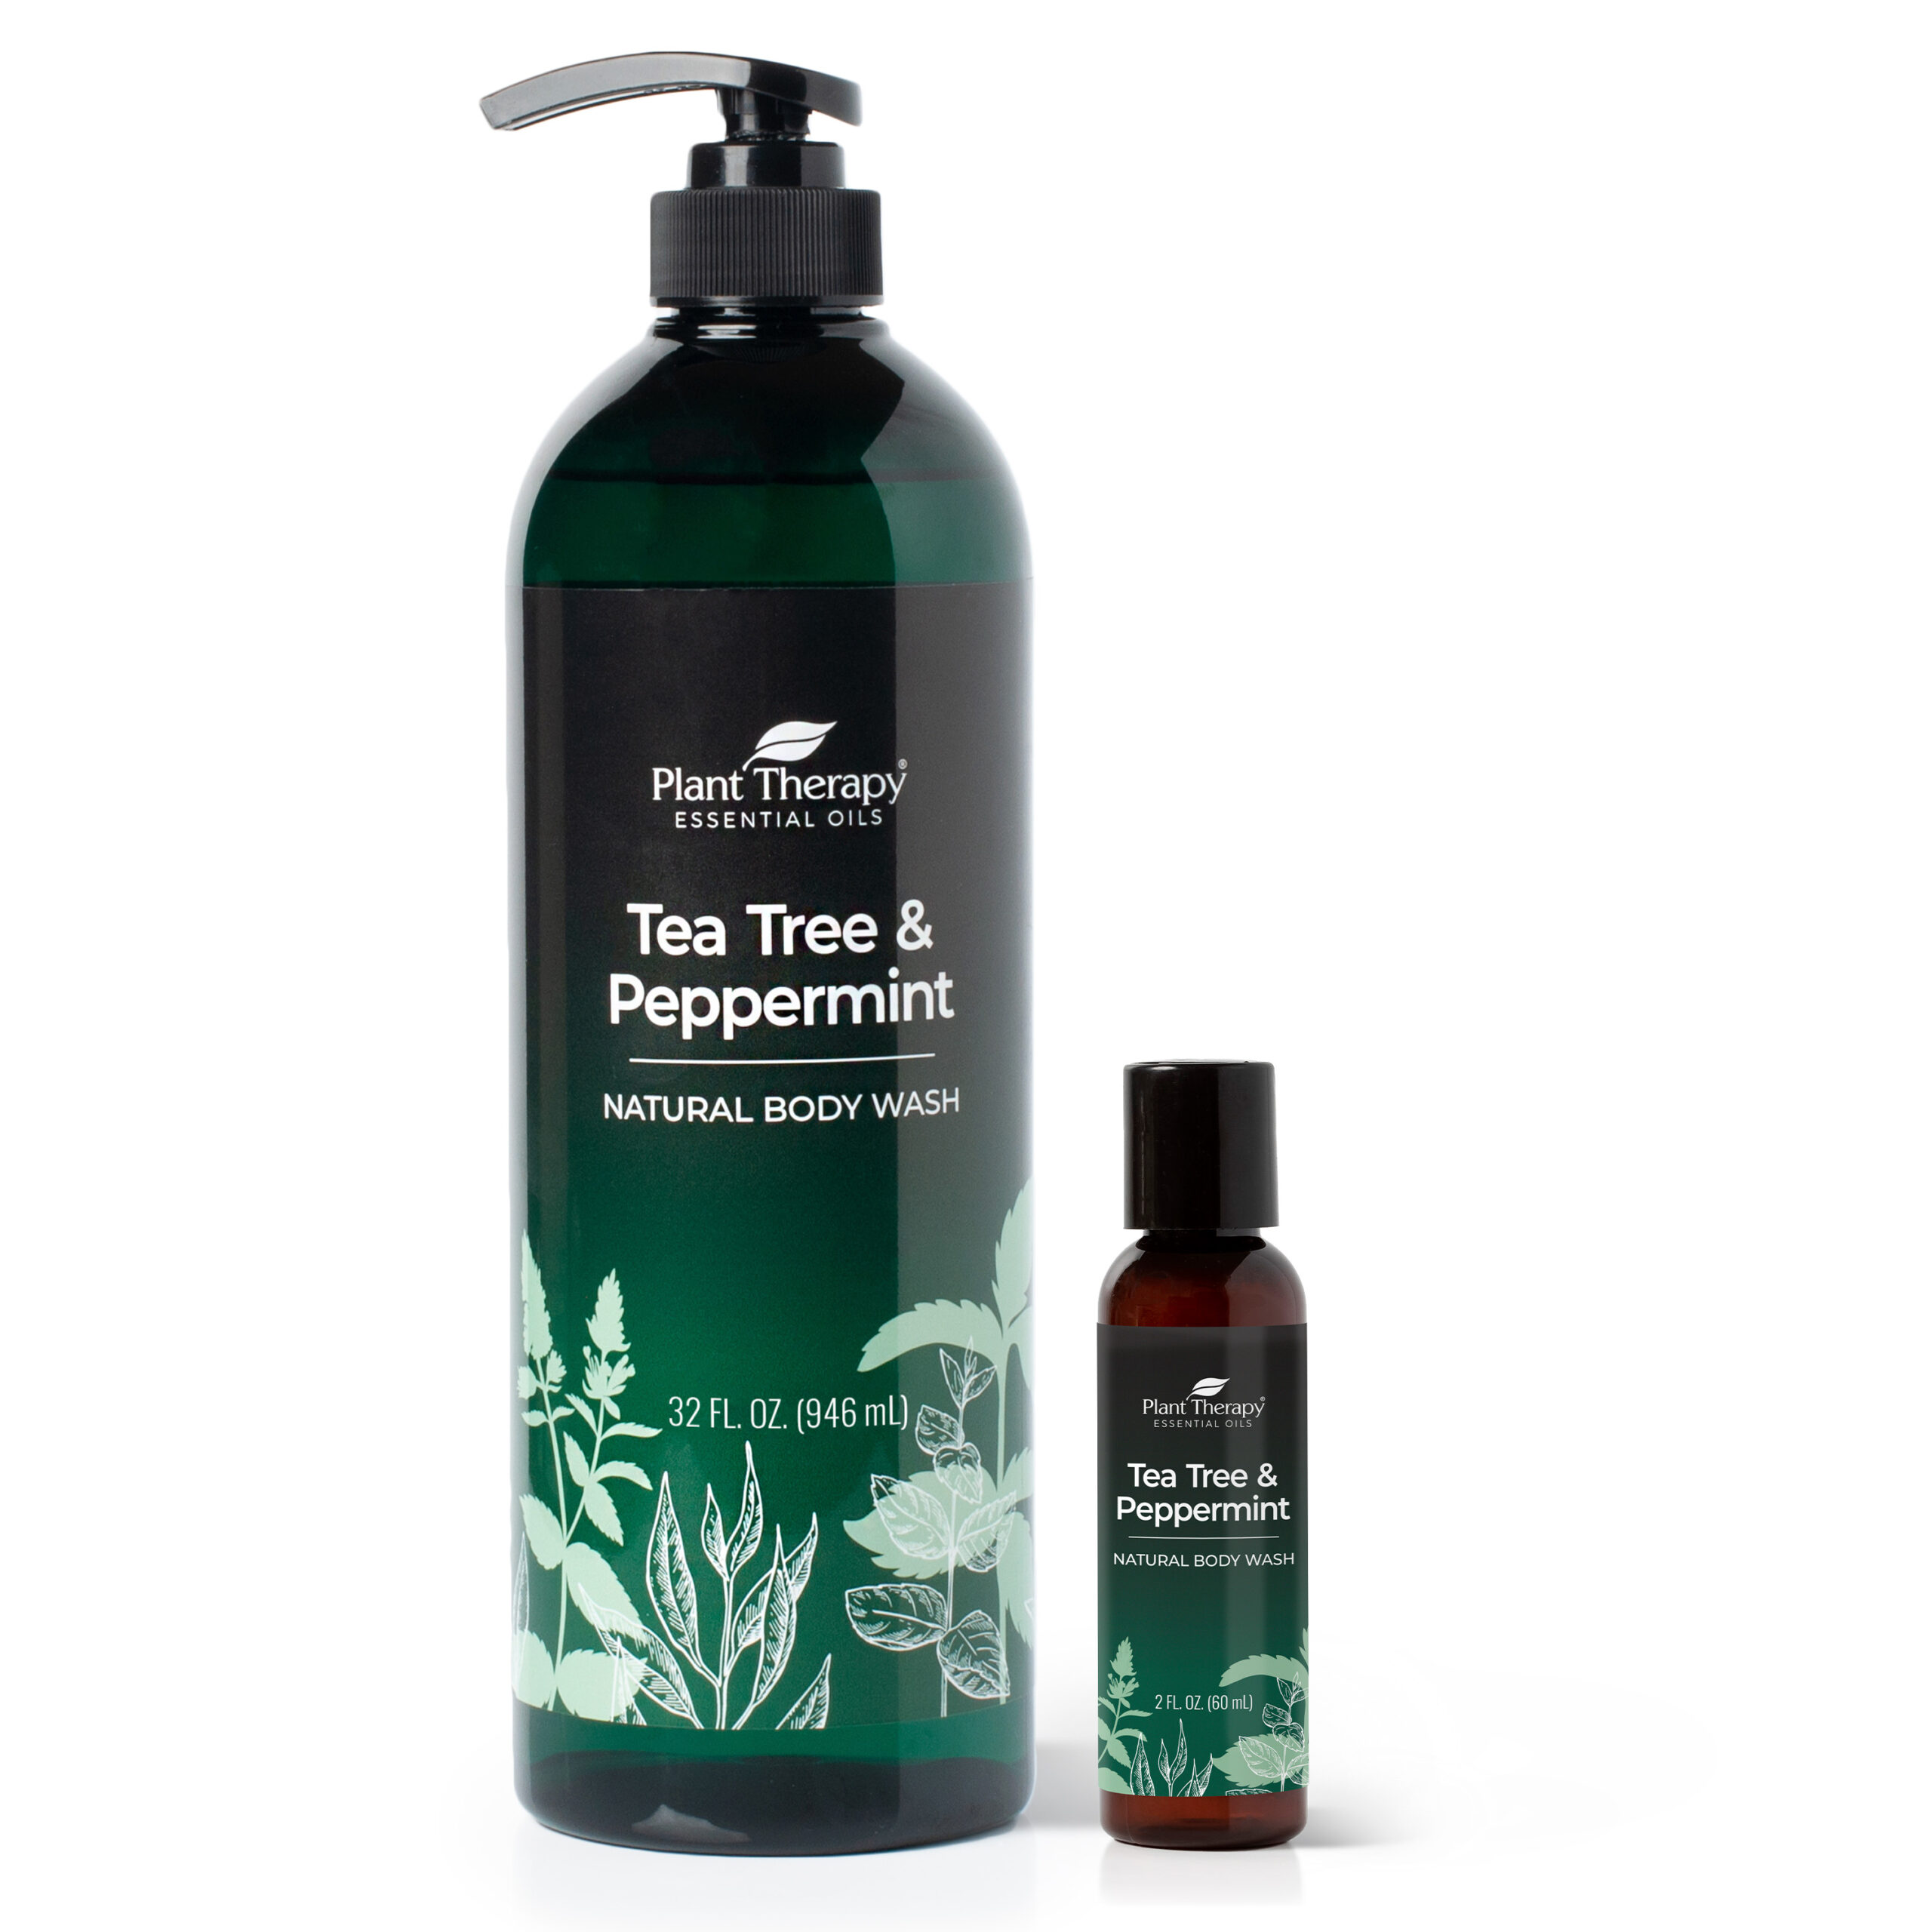 Plant therapy body wash